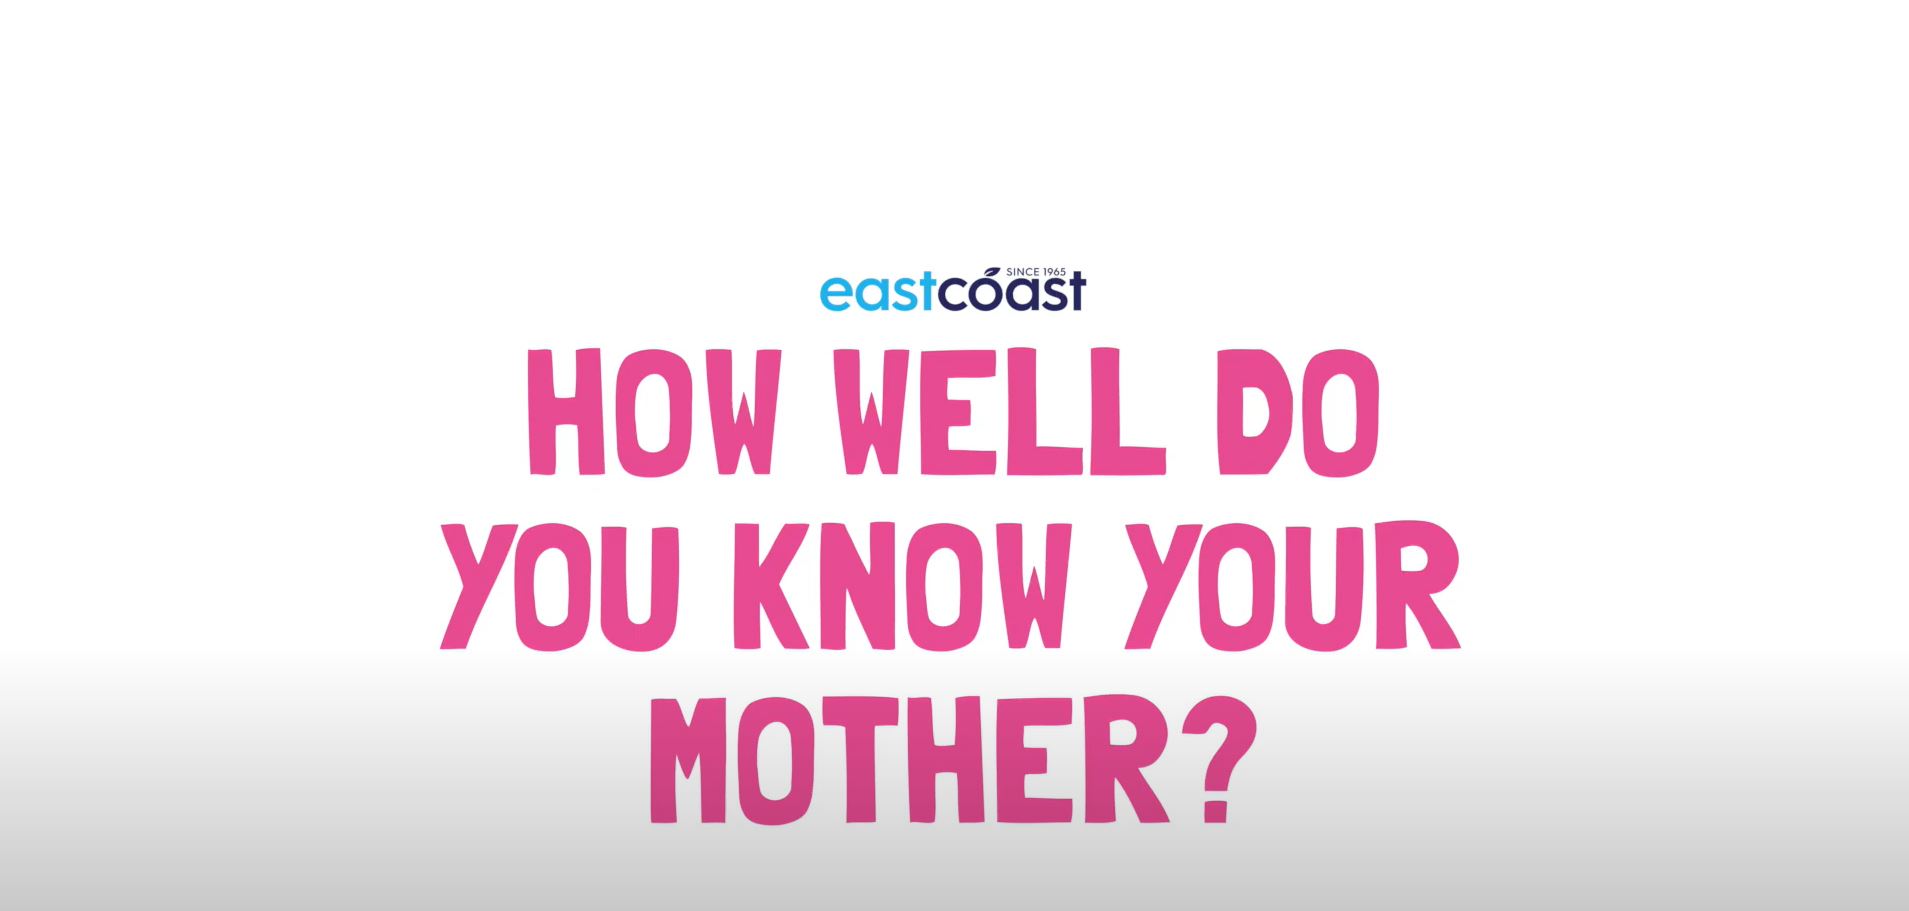 Happy mother's day from eastcoast